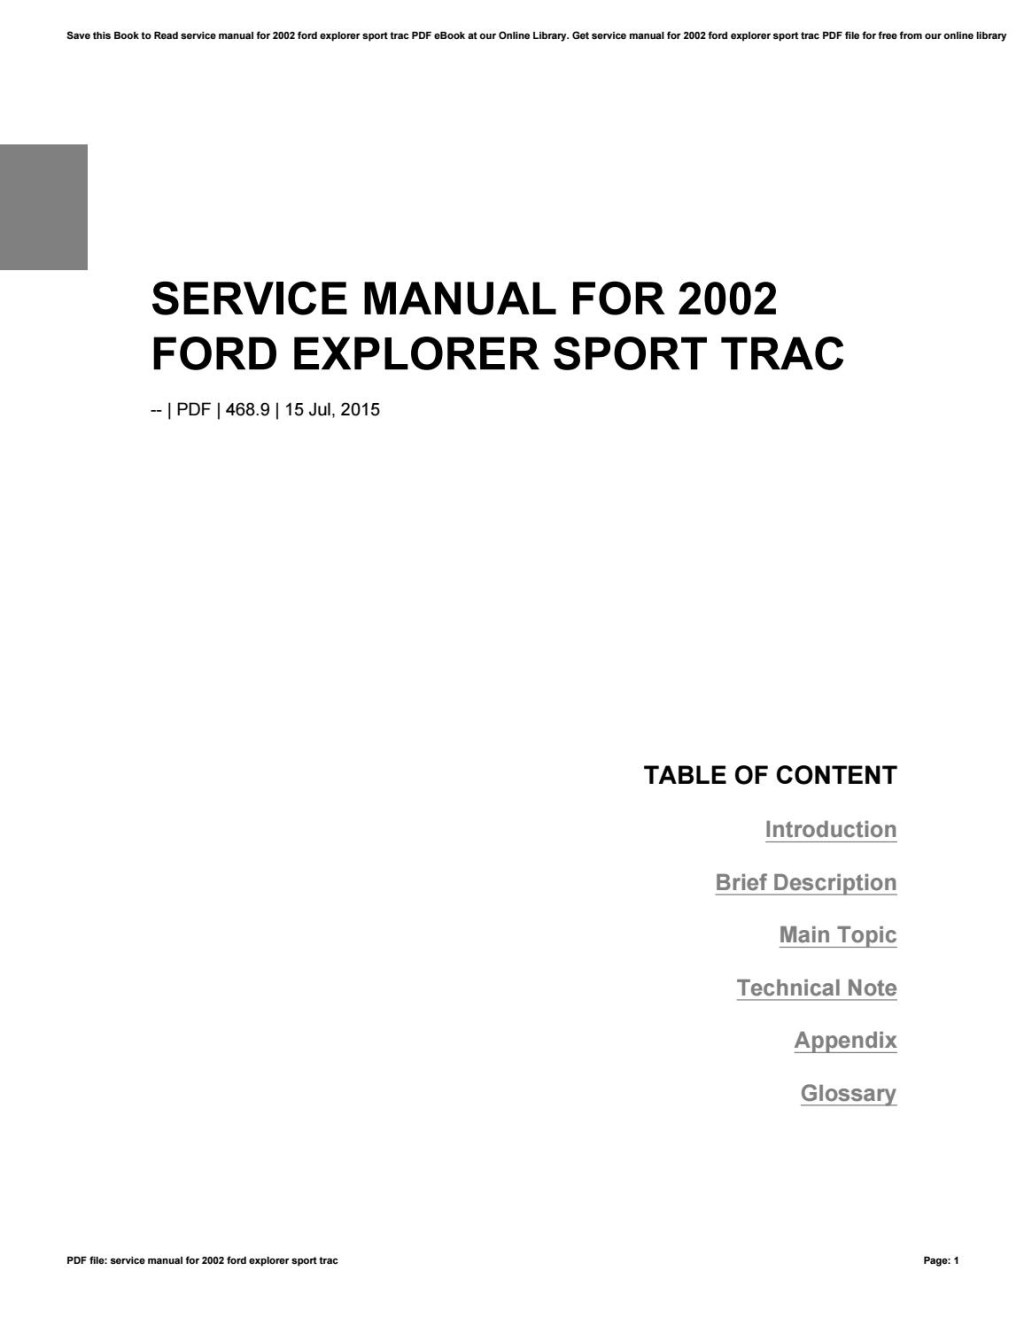 Picture of: Service manual for  ford explorer sport trac by t – Issuu